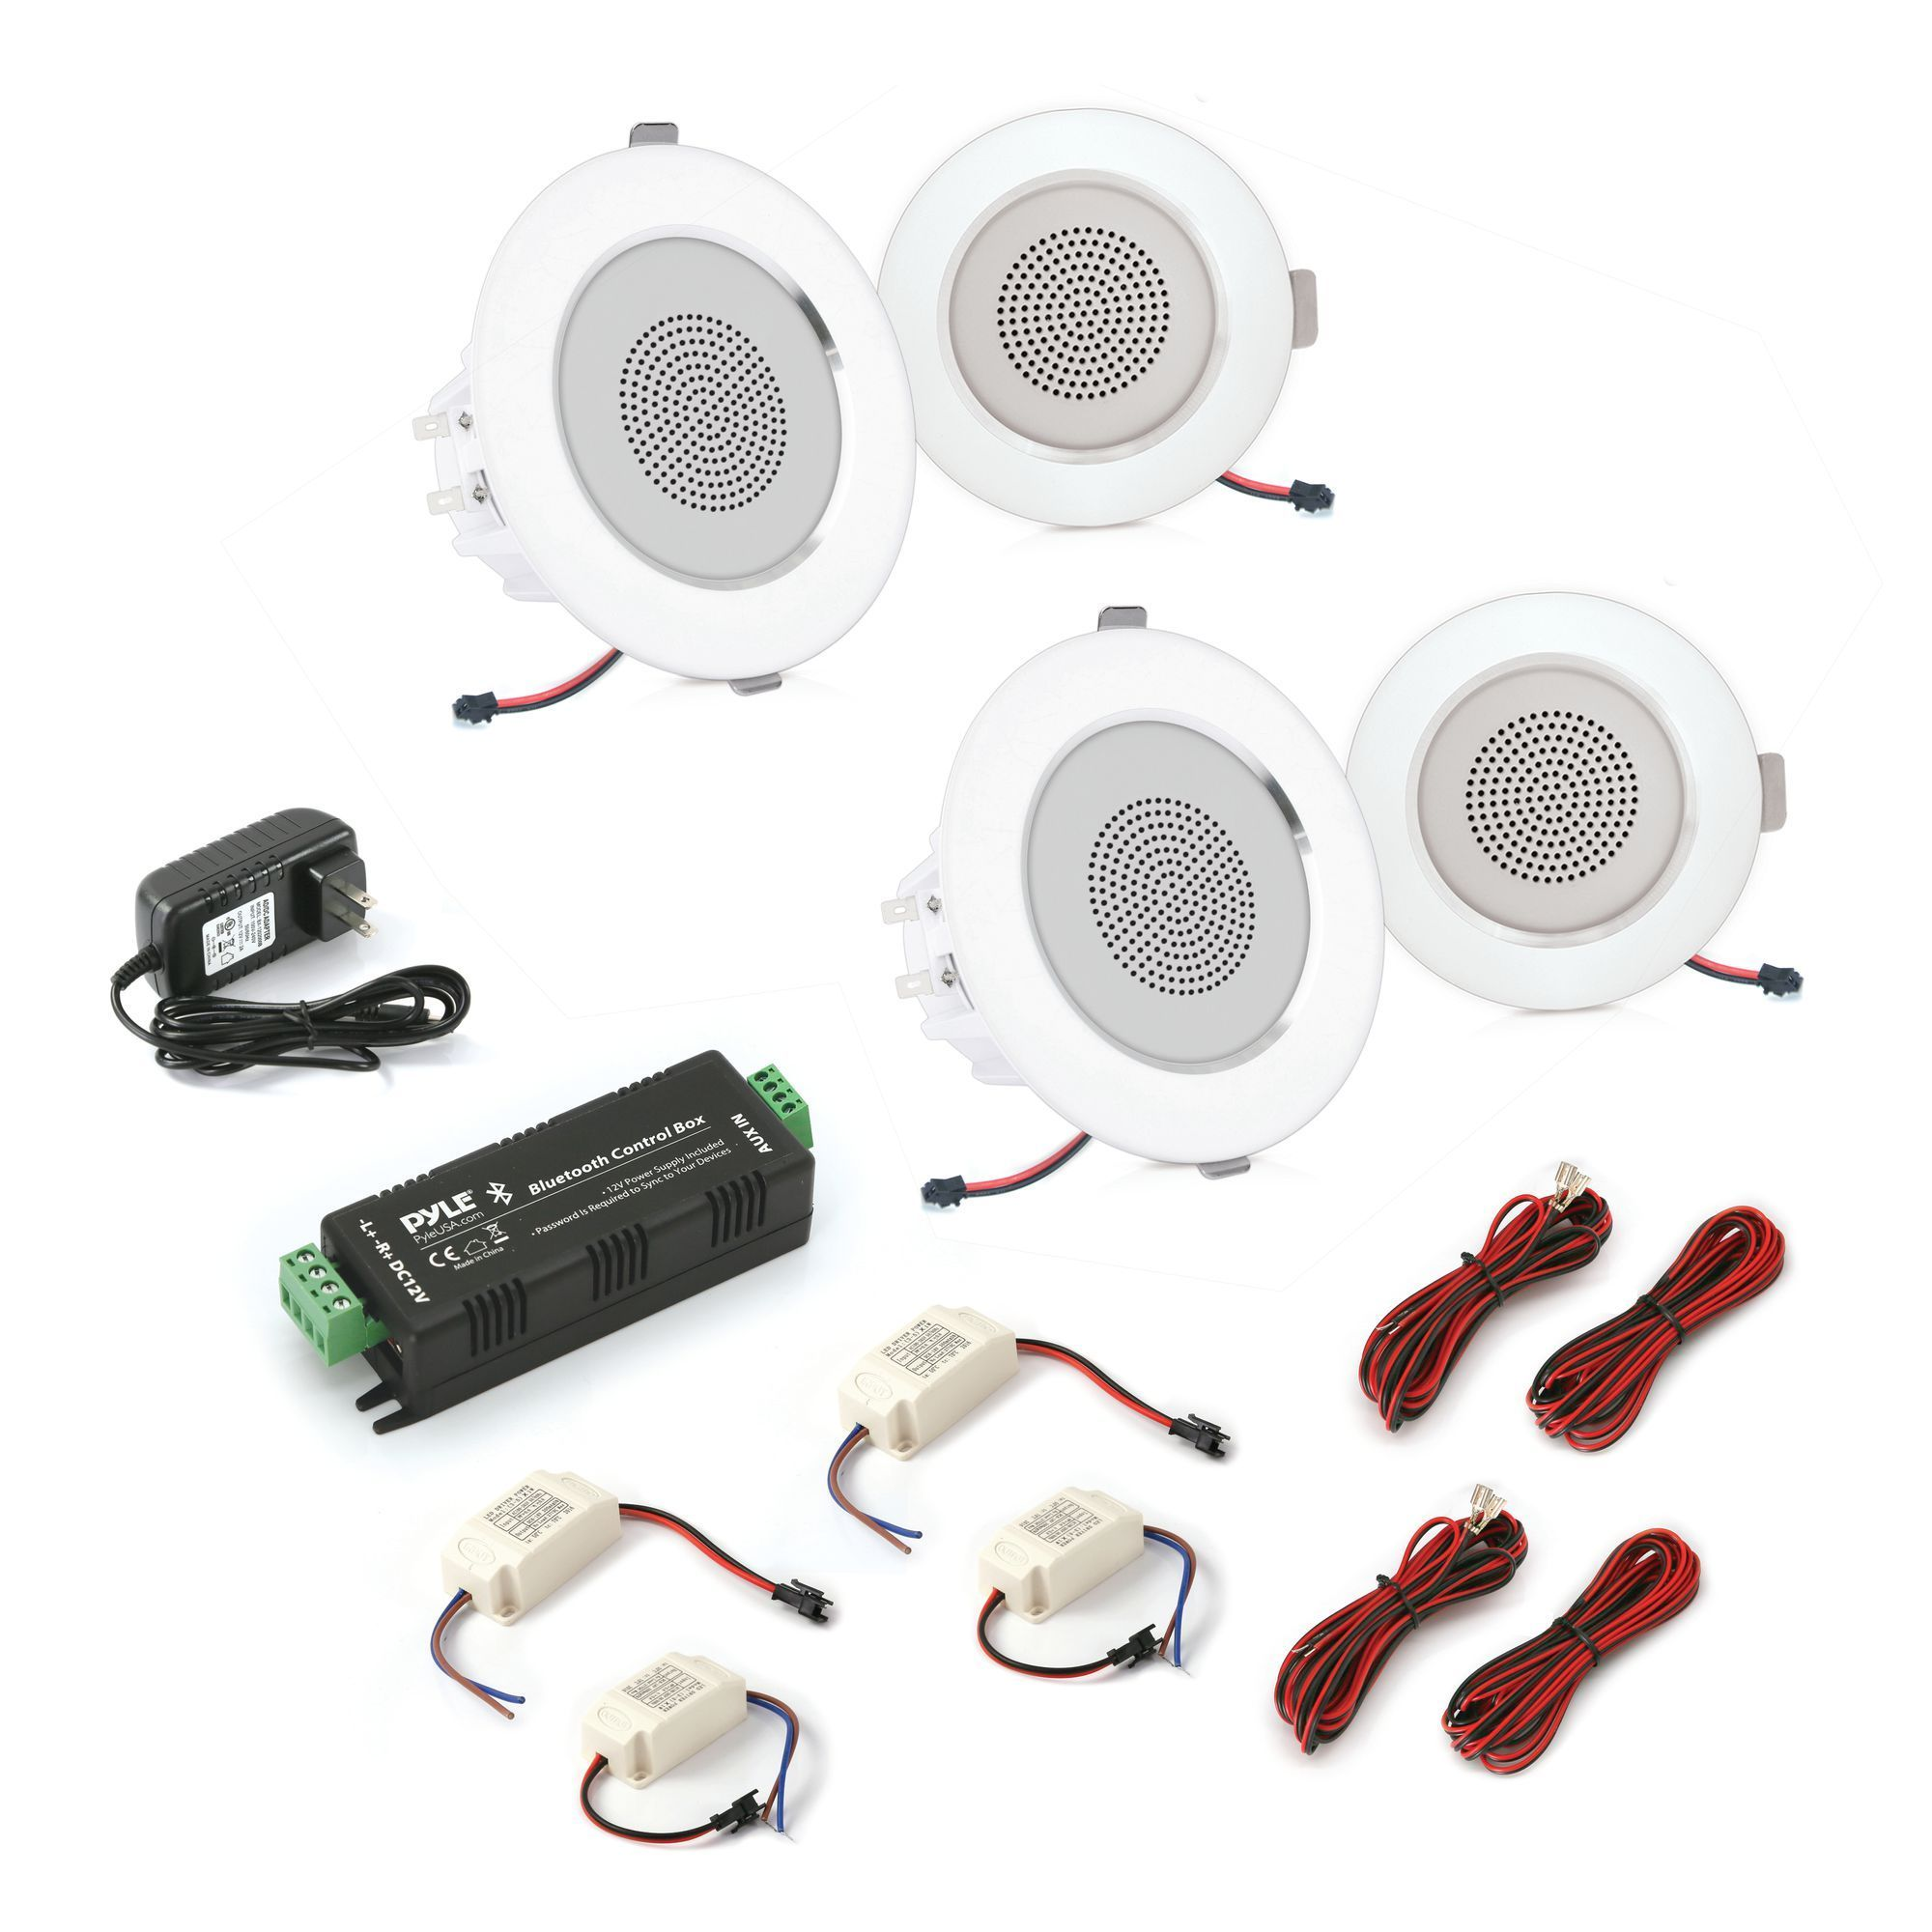 Pyle Set of 4 4” Bluetooth 2-Way Home Speaker System, In-wall/Ceiling, Amplifier, (PDIC4CBTL4B)